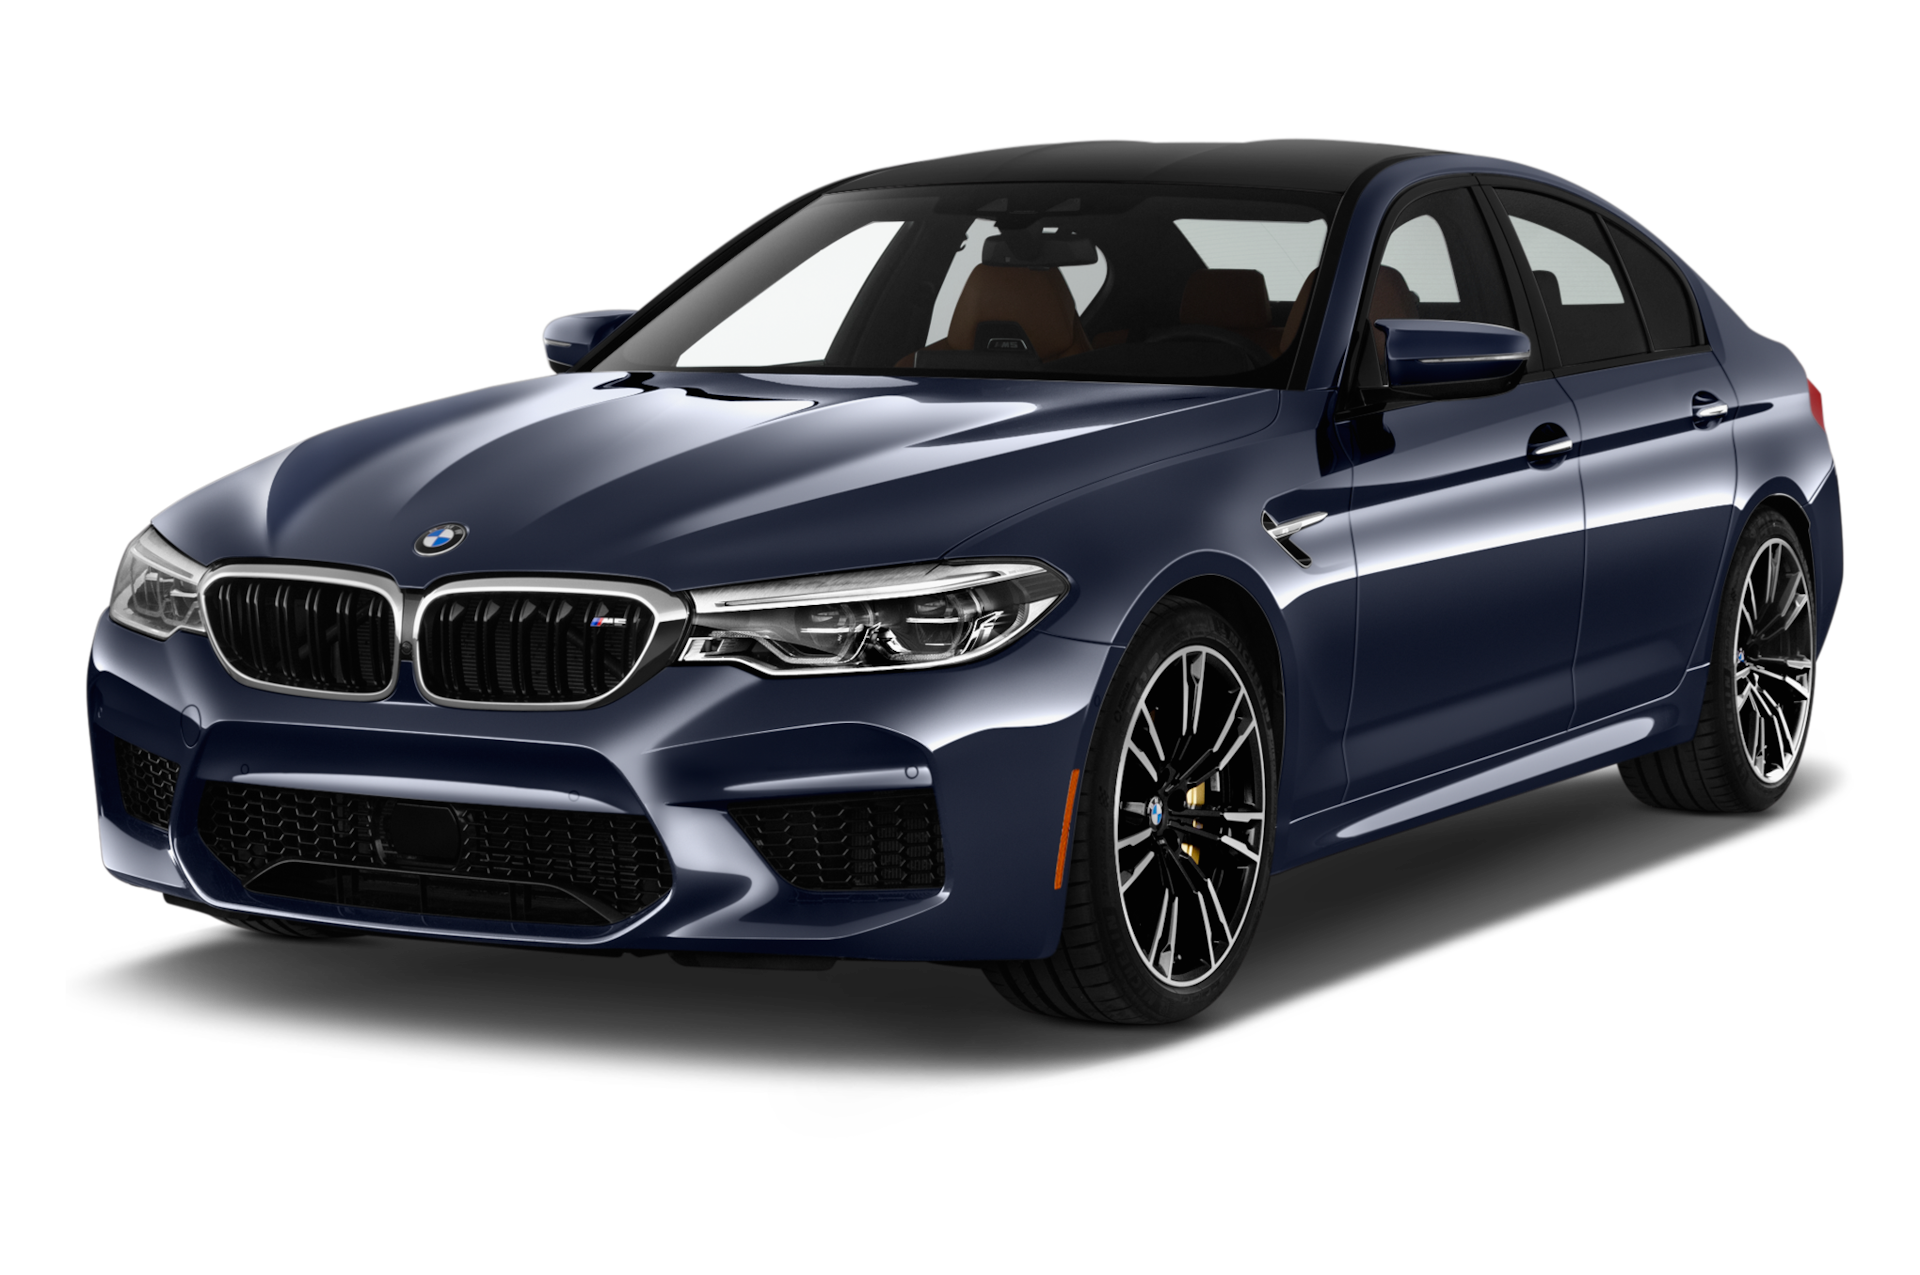 2020 BMW M5 Prices, Reviews, and Photos - MotorTrend